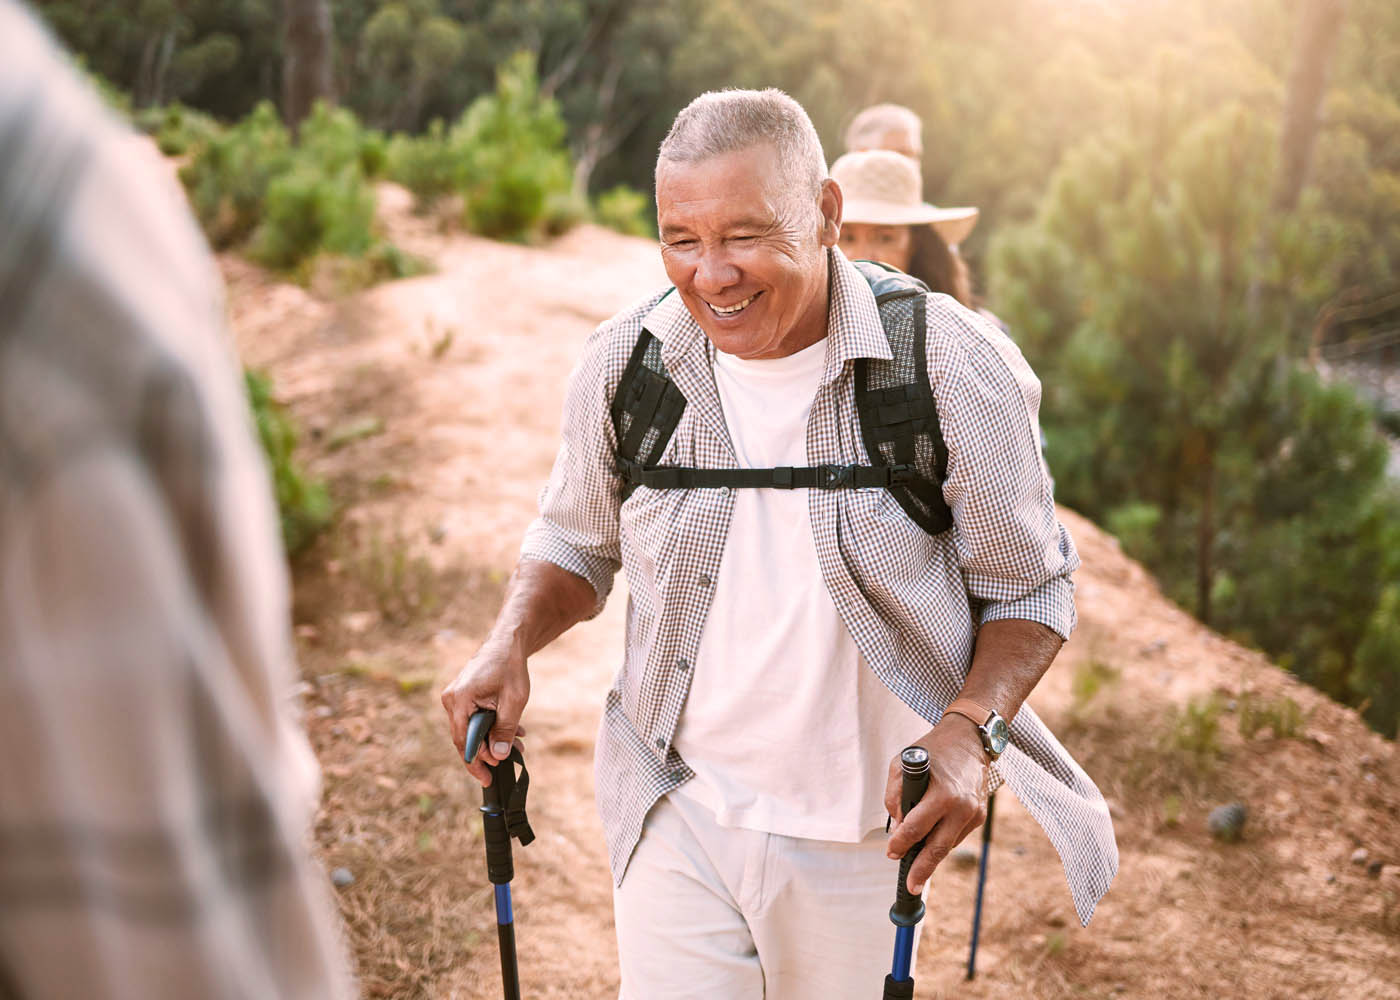 A man hiking with his wife free of pain after visiting Light Lounge's chronic pain treatment center in your local area.